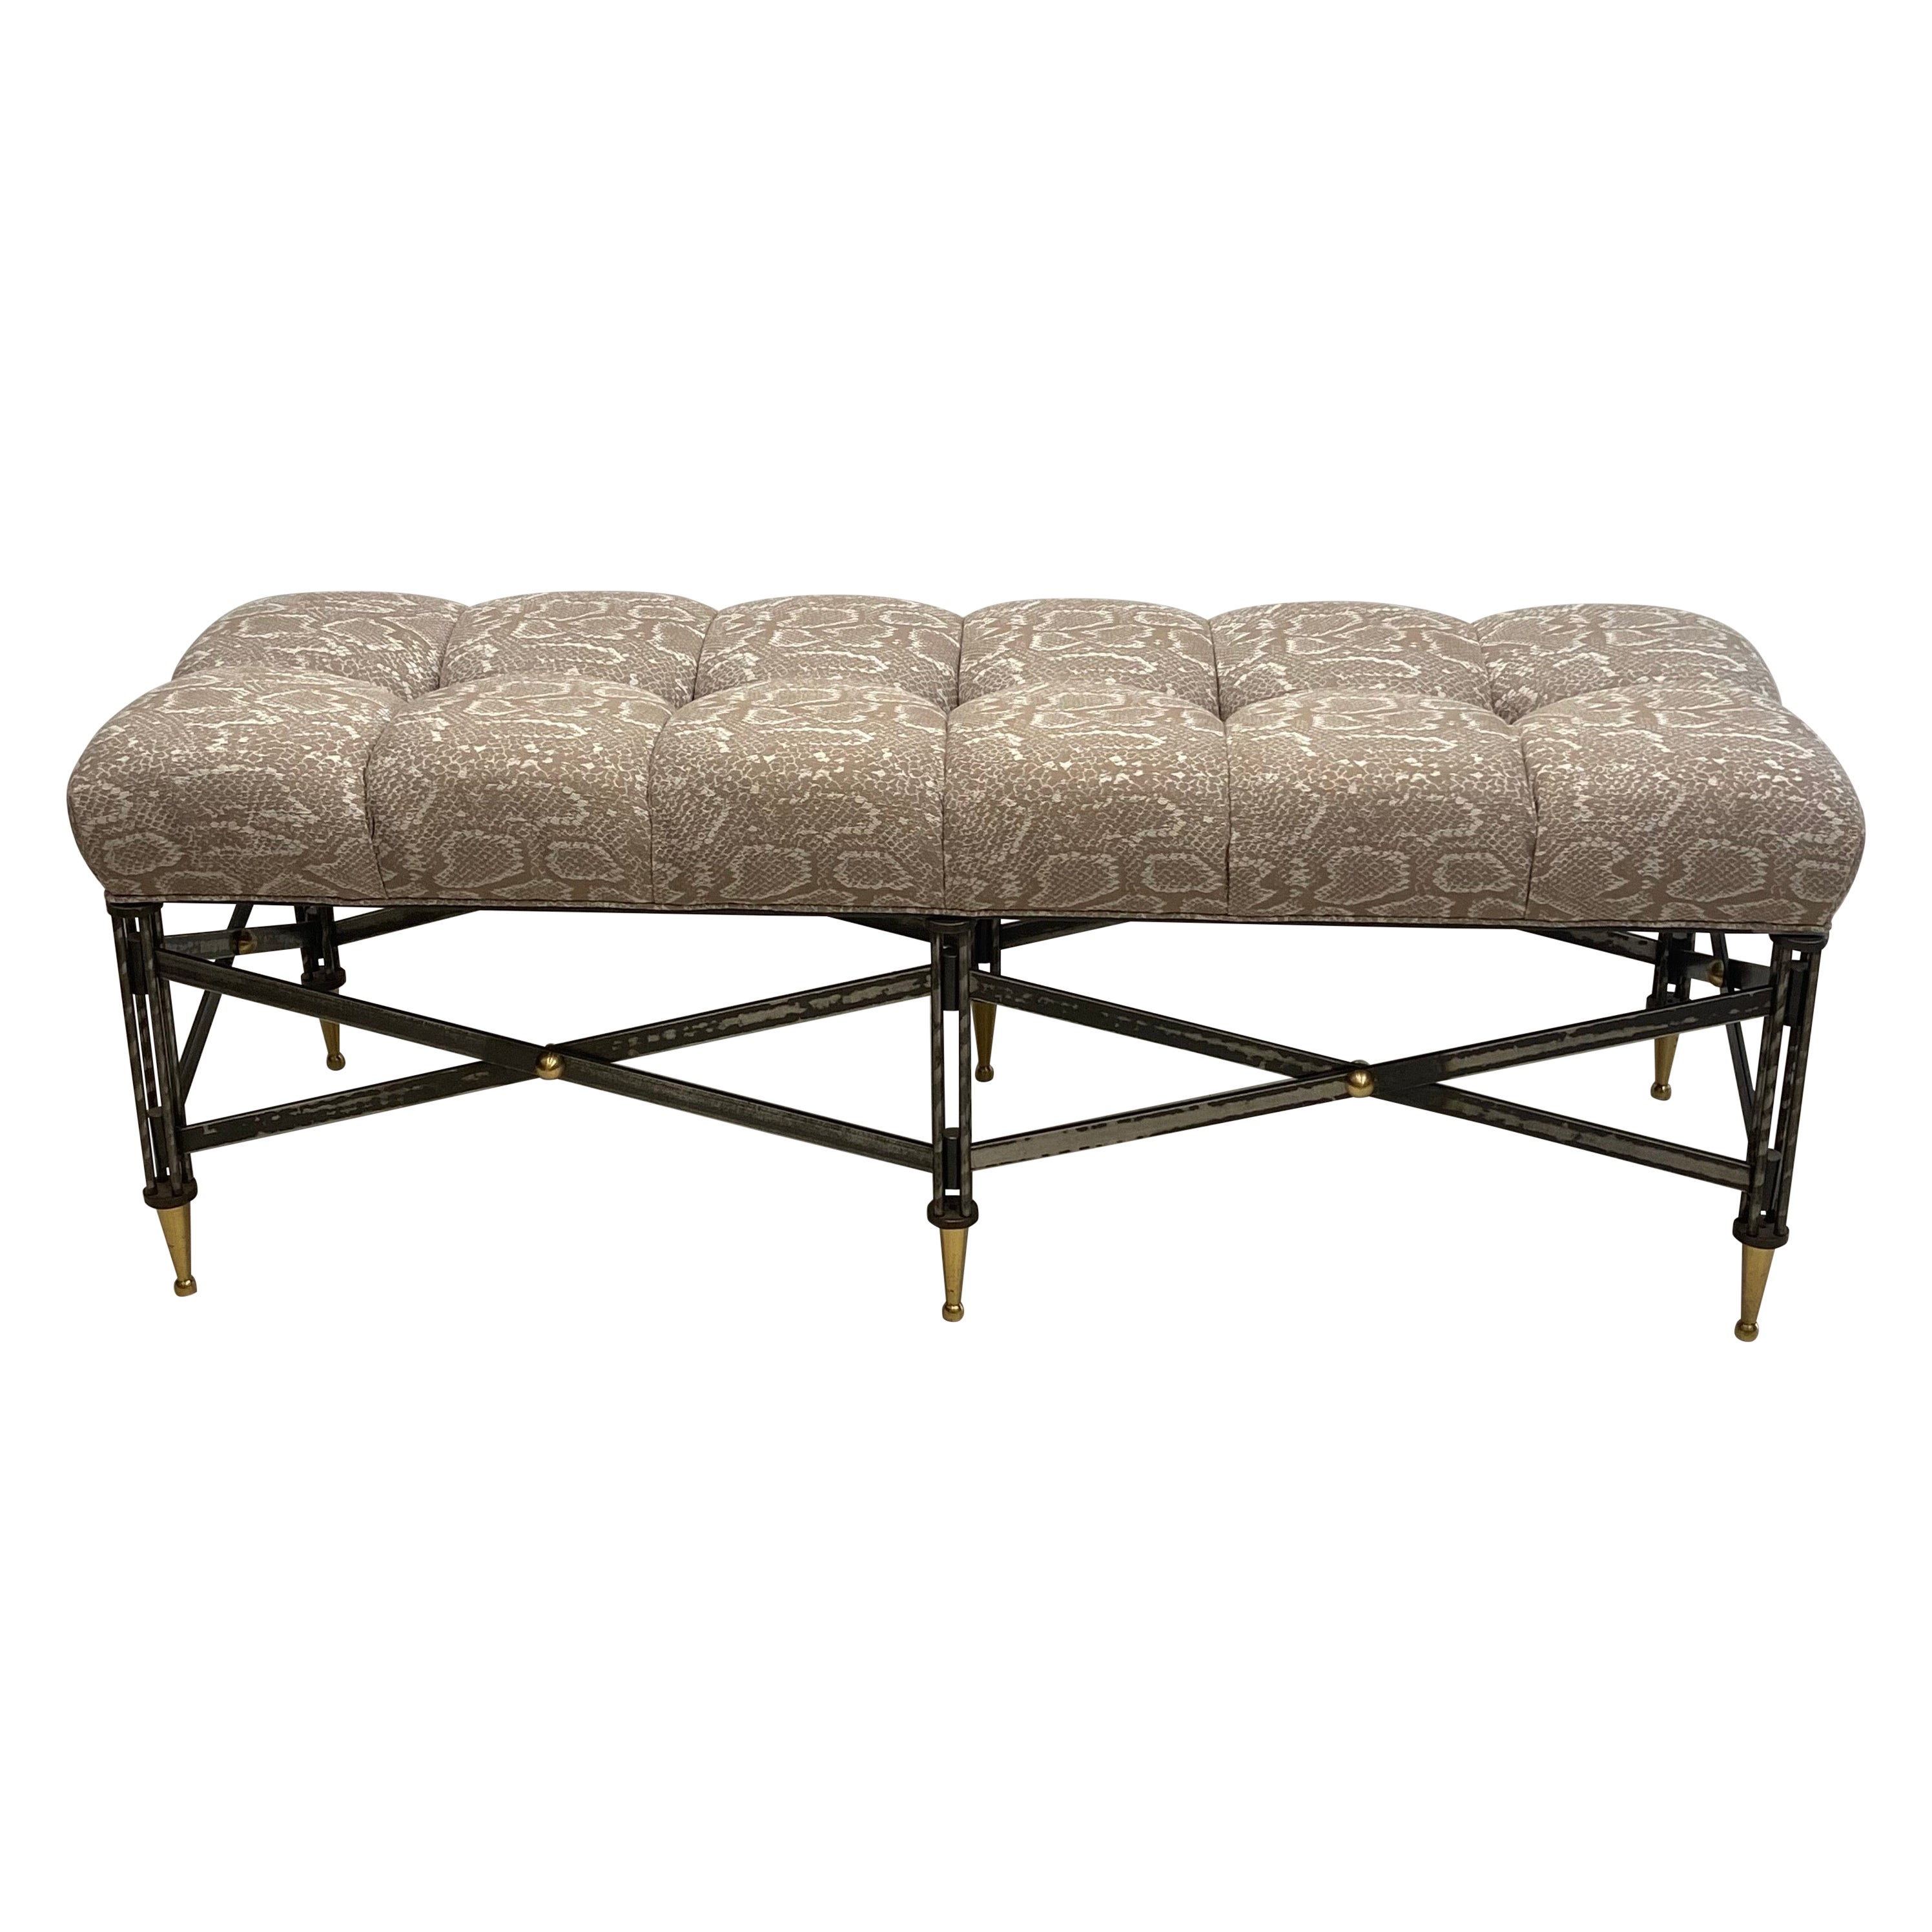 Neoclassical Iron and Brass Upholstered Bench